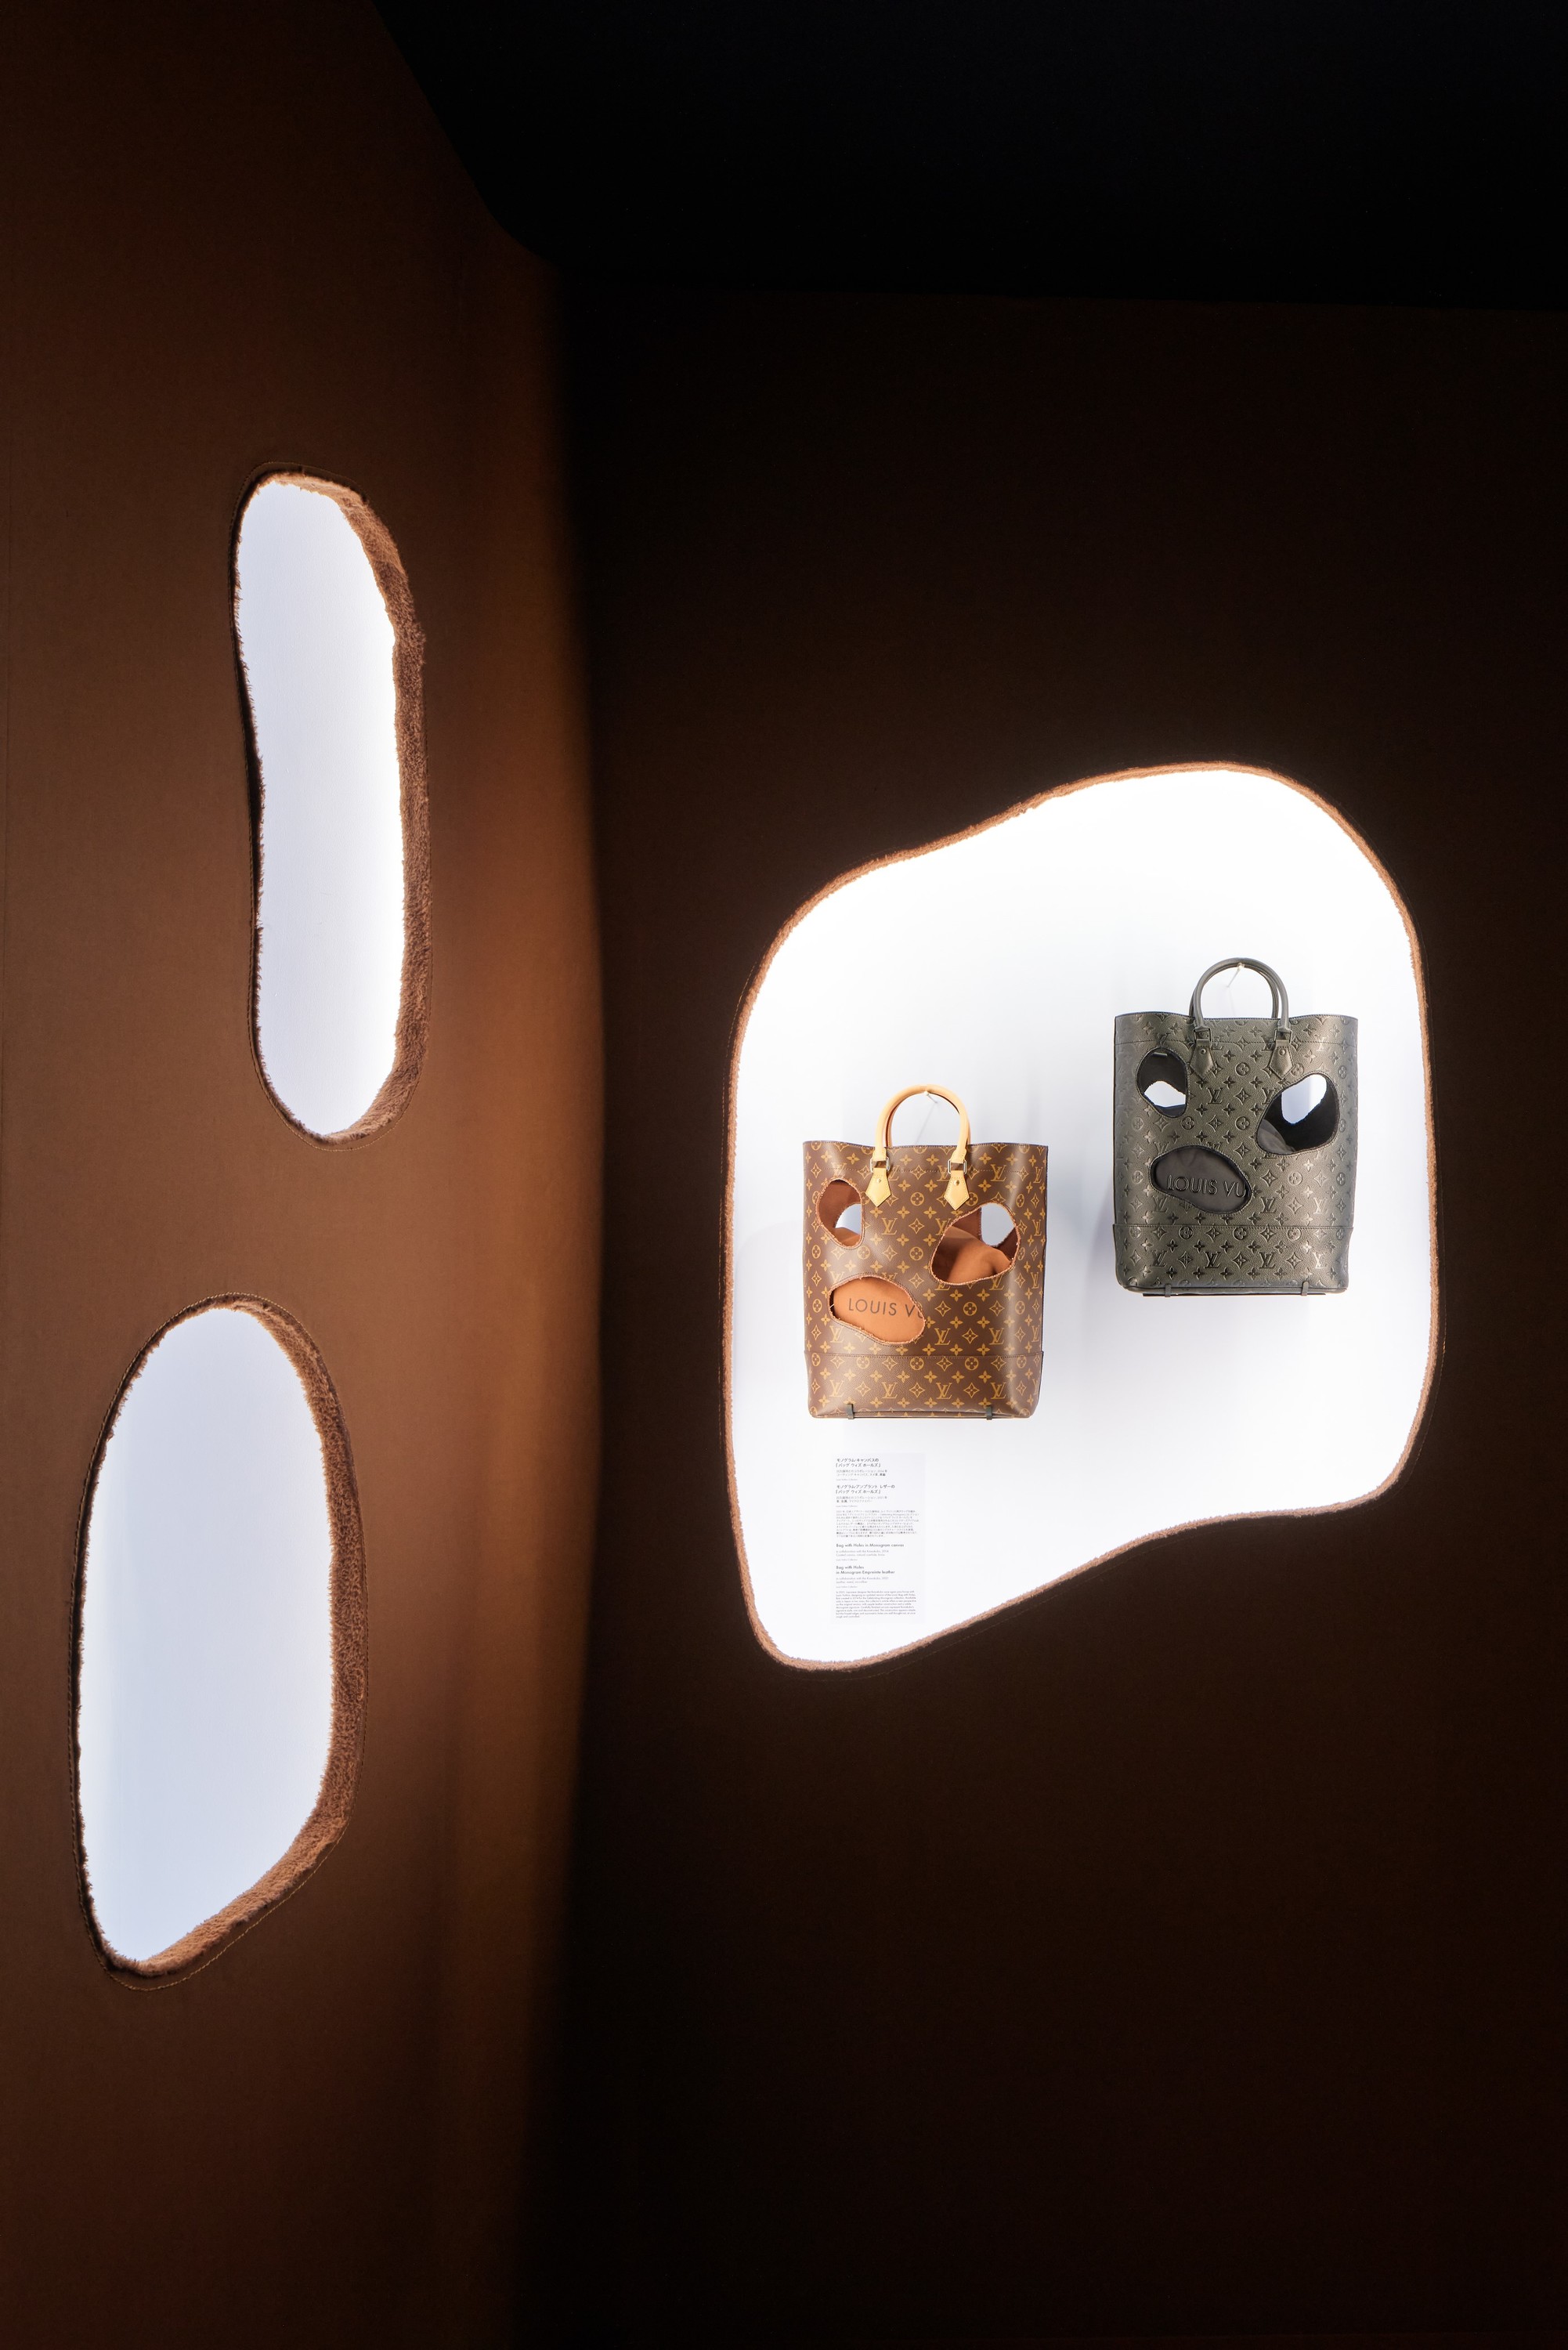 Louis Vuitton has a free exhibition in Harajuku showing its most